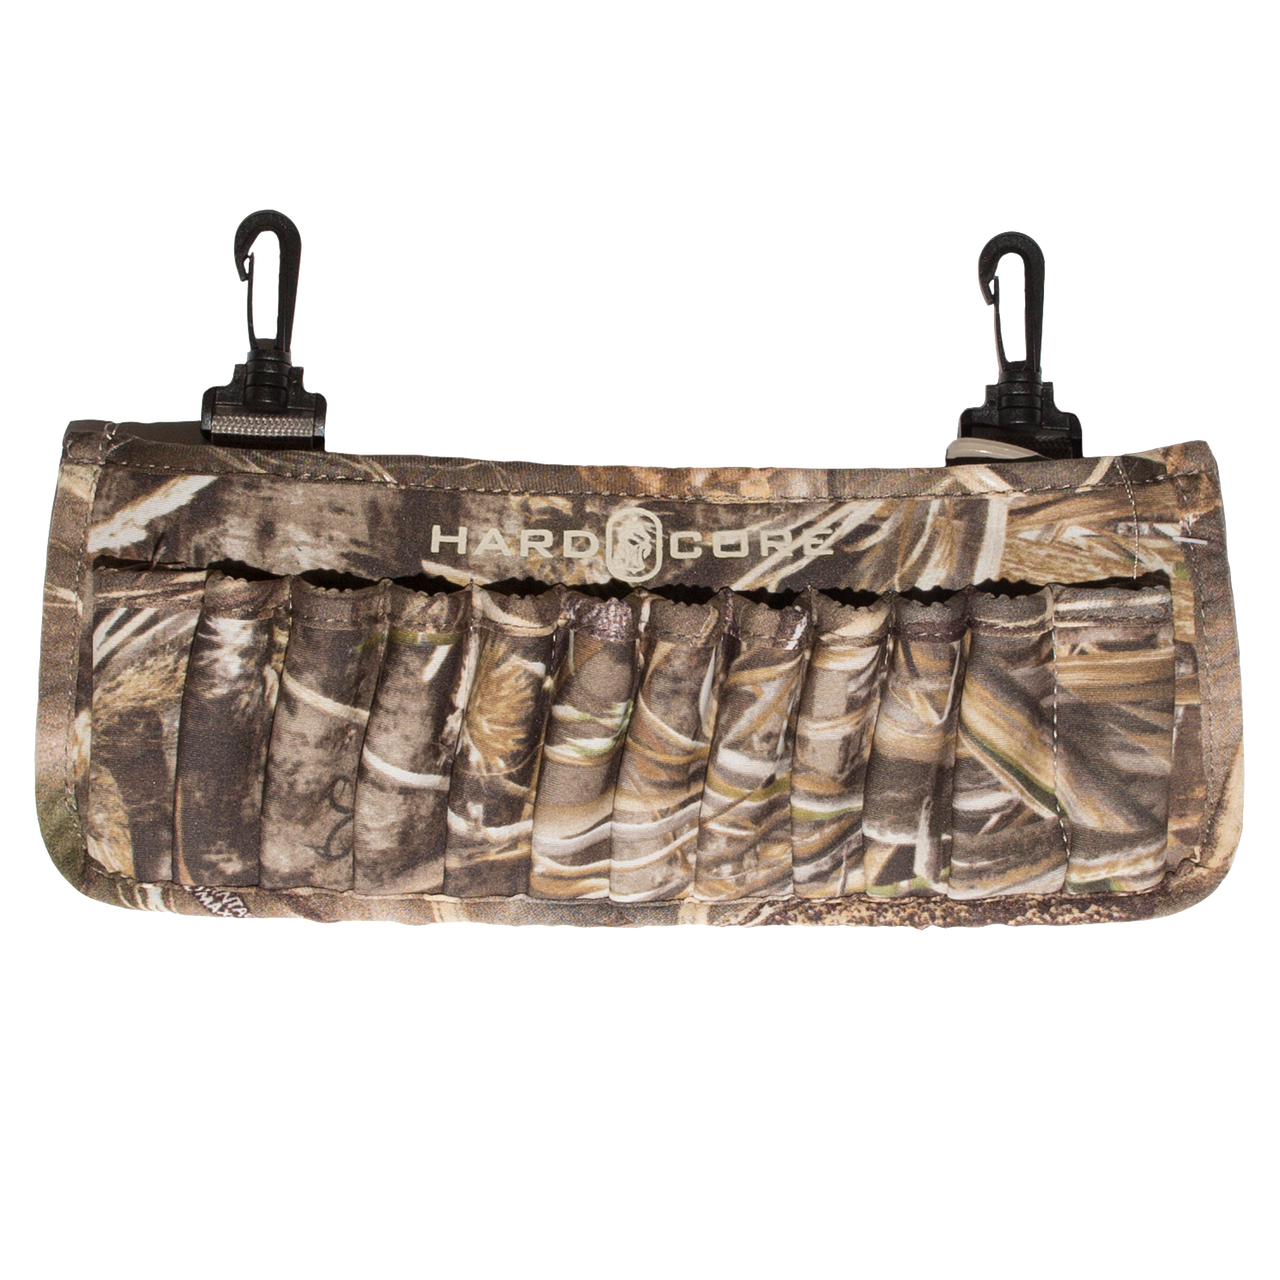 Keep your ammo close at hand and high and dry with the Hard Core Shell Pack. 3 Realtree¬Æ MAX-5‚Ñ¢ 3mm neoprene construction with 24 shell loops (12 per side), a zippered, water-resistant compartment and snap swivels to connect the pack to your waders make this shell pack a great addition to your gear.
¬†
WARNING:¬†Cancer and Reproductive Harm-¬†www.P65Warnings.ca.gov.